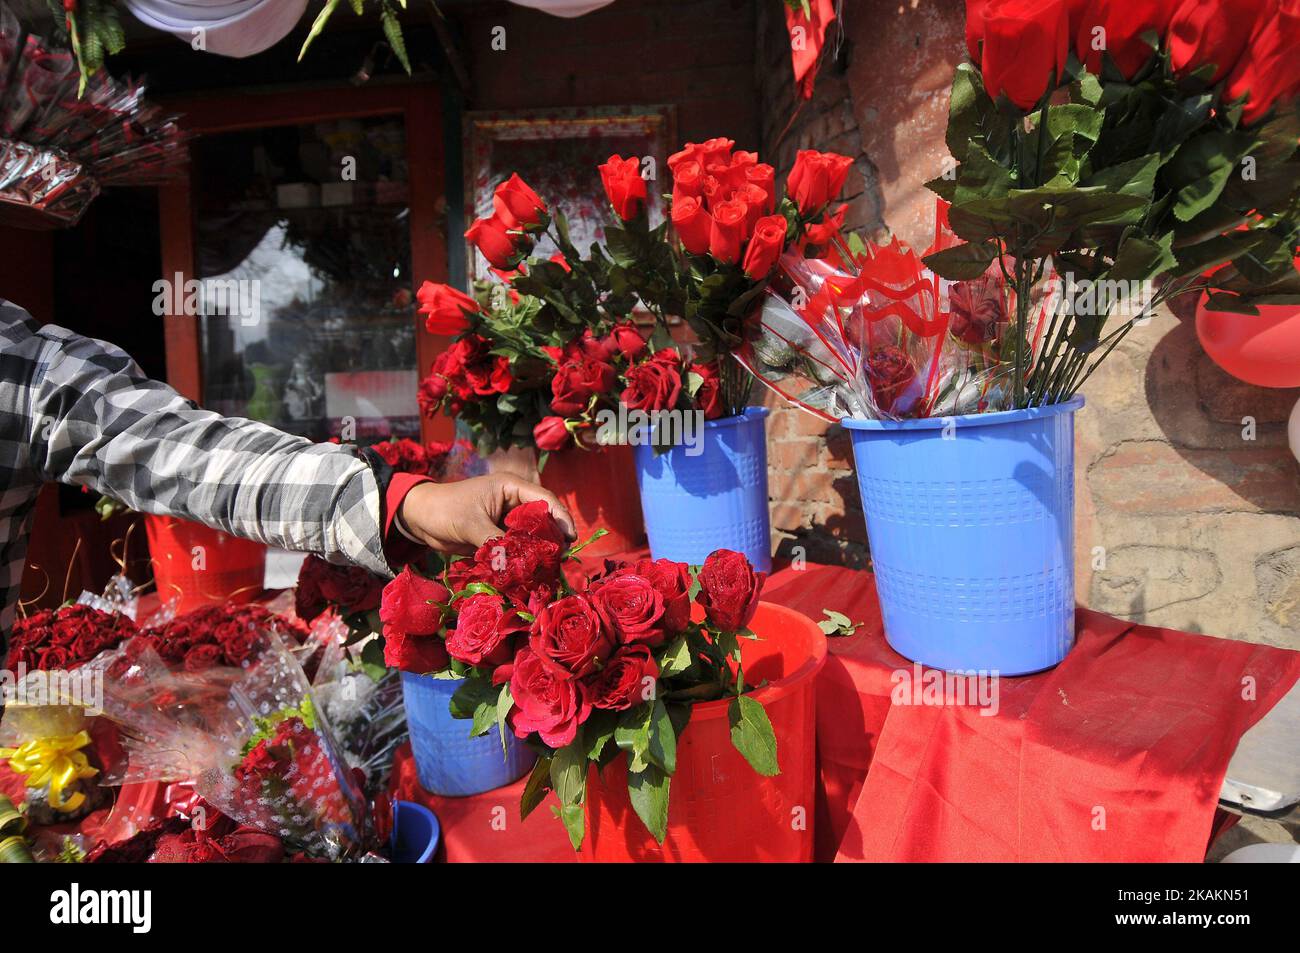 A worker arranging roses for the celebration on Valentine's day at Durbarmarg, Kathmandu, Nepal on Tuesday, February 14, 2017. Flower shops in the Kathmandu Valley have prepared thousands of rose sticks for the ValentineÂ’s Day at Durbarmarg, Kathmandu, Nepal. Nepal has imported 200,000 red roses, a symbol of love worth Rs 5 million from India for celebrating Valentine's Day, according to the Floriculture Association Nepal. (Photo by Narayan Maharjan/NurPhoto) *** Please Use Credit from Credit Field *** Stock Photo